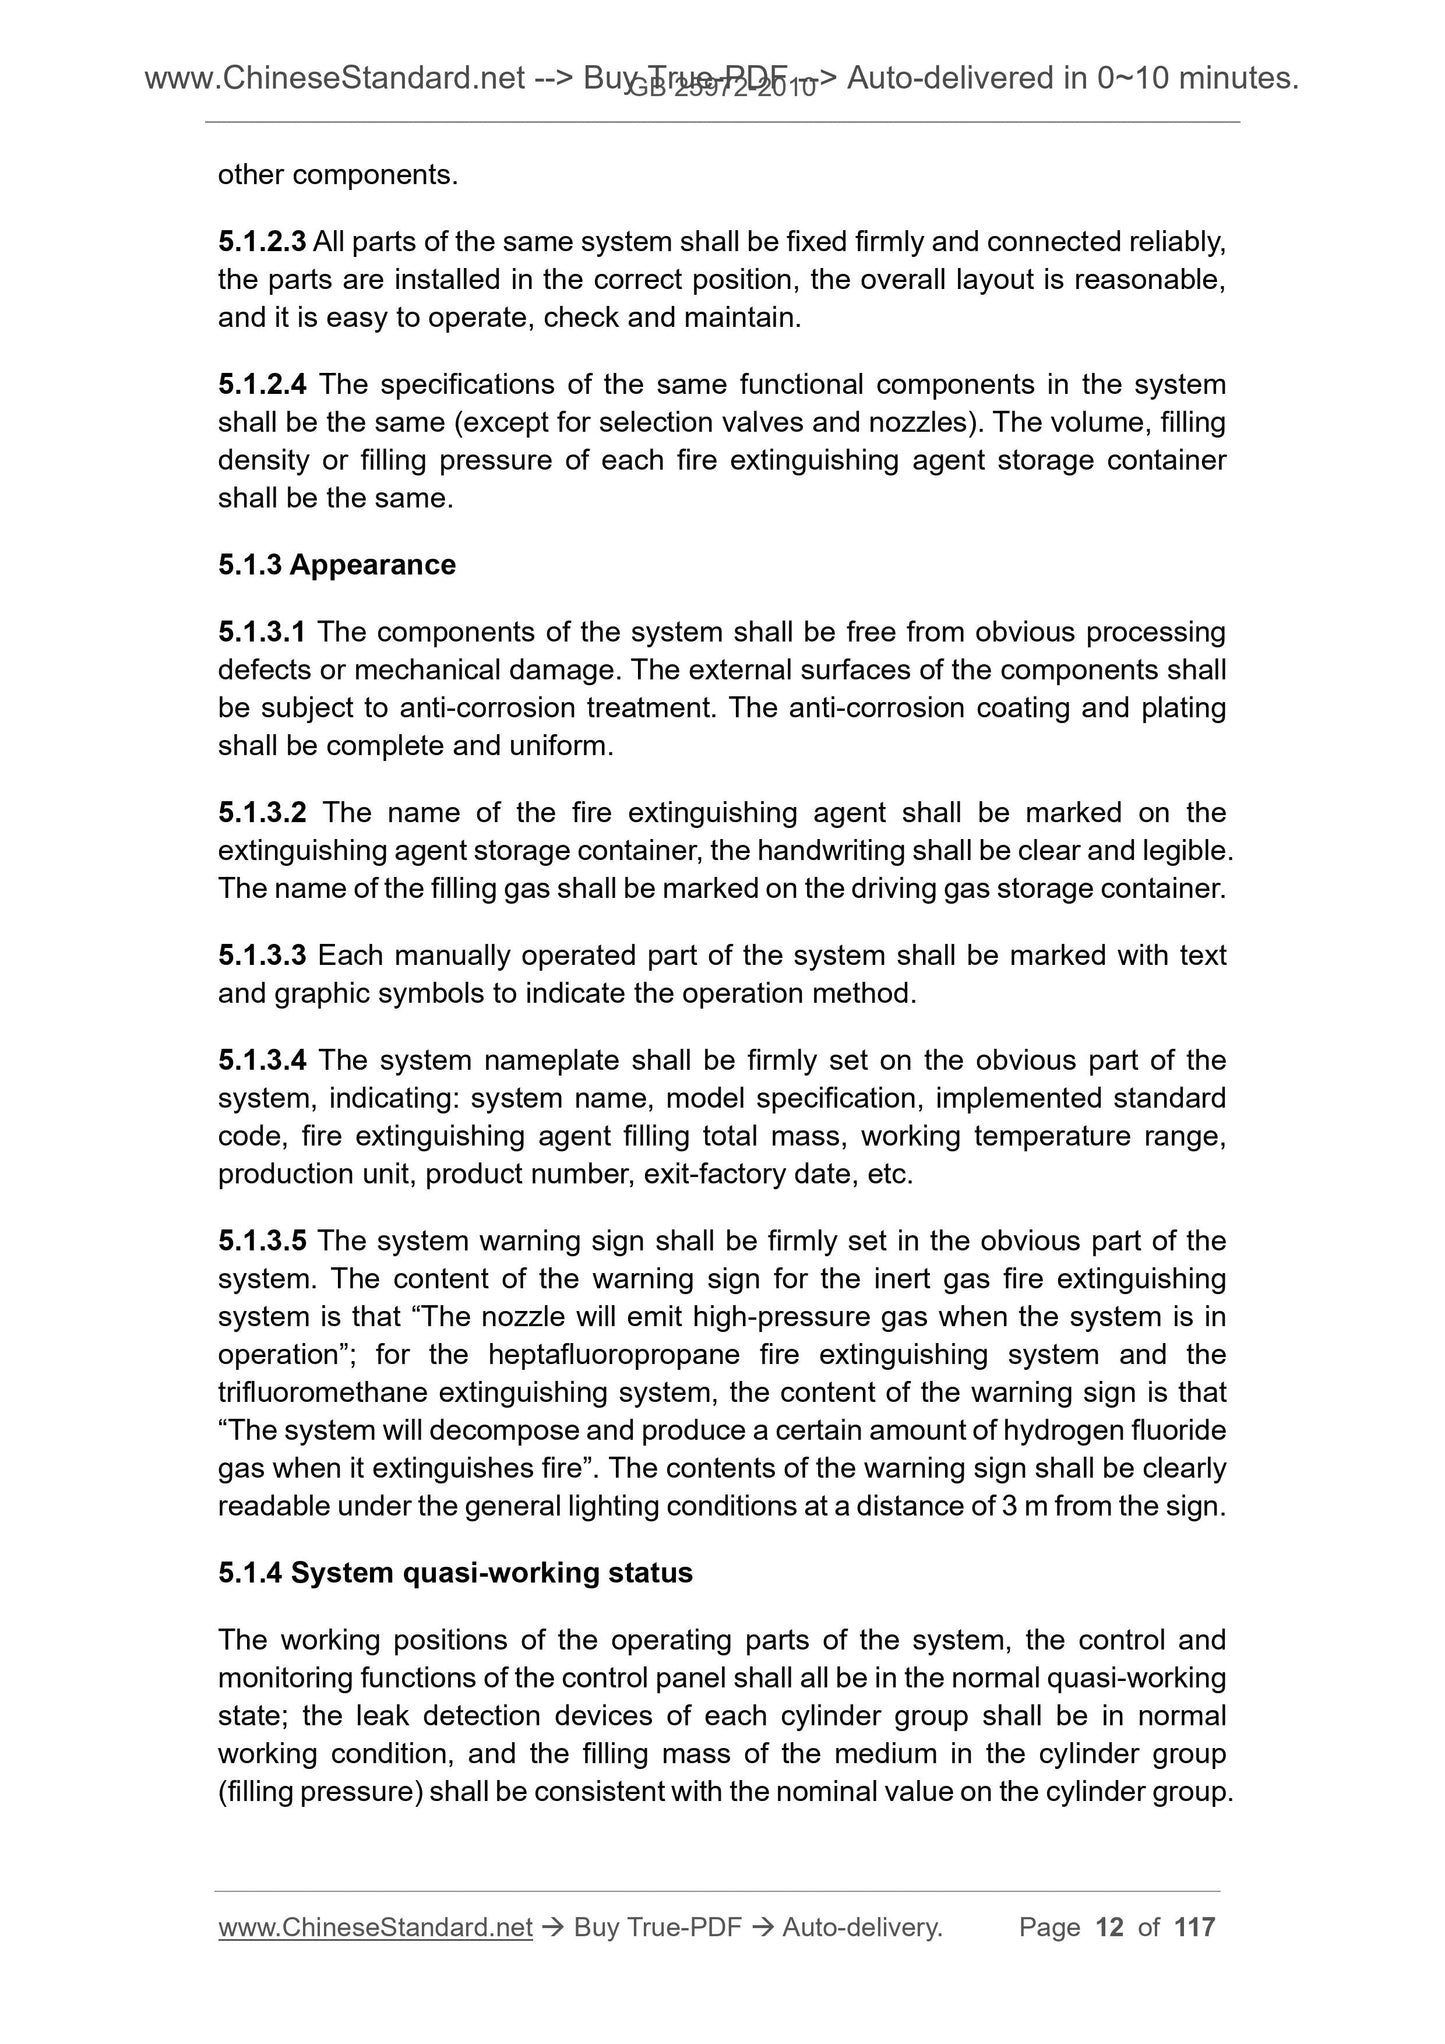 GB 25972-2010 Page 7